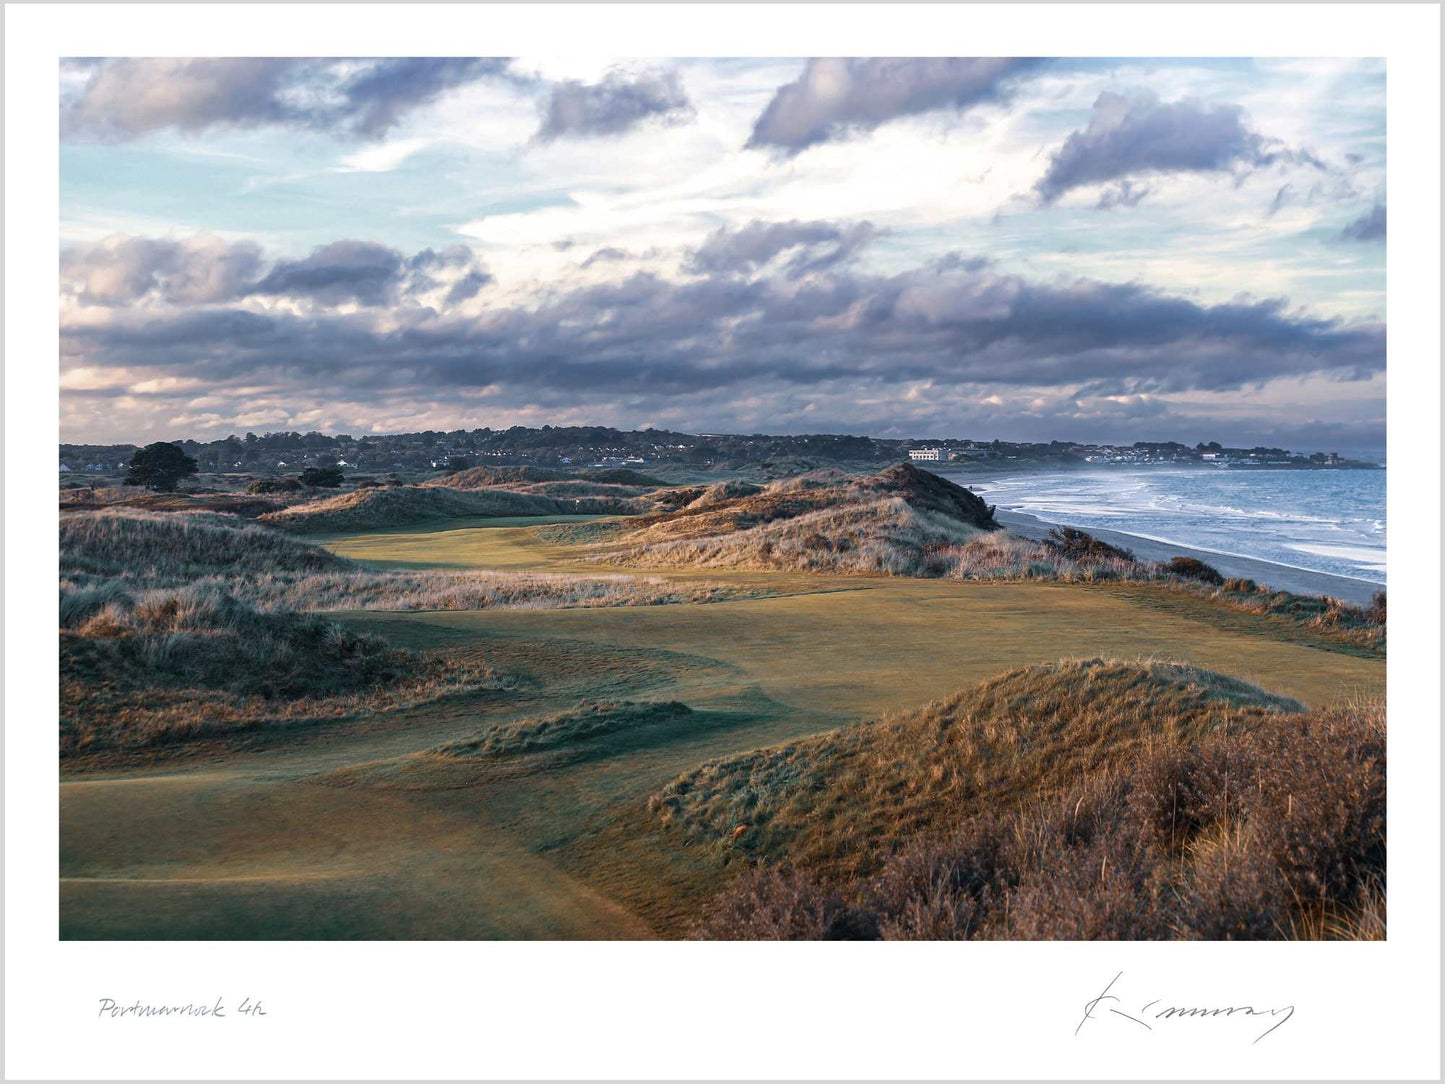 A photo of the 4th hole at Portmarnock taken by Kevin Murray